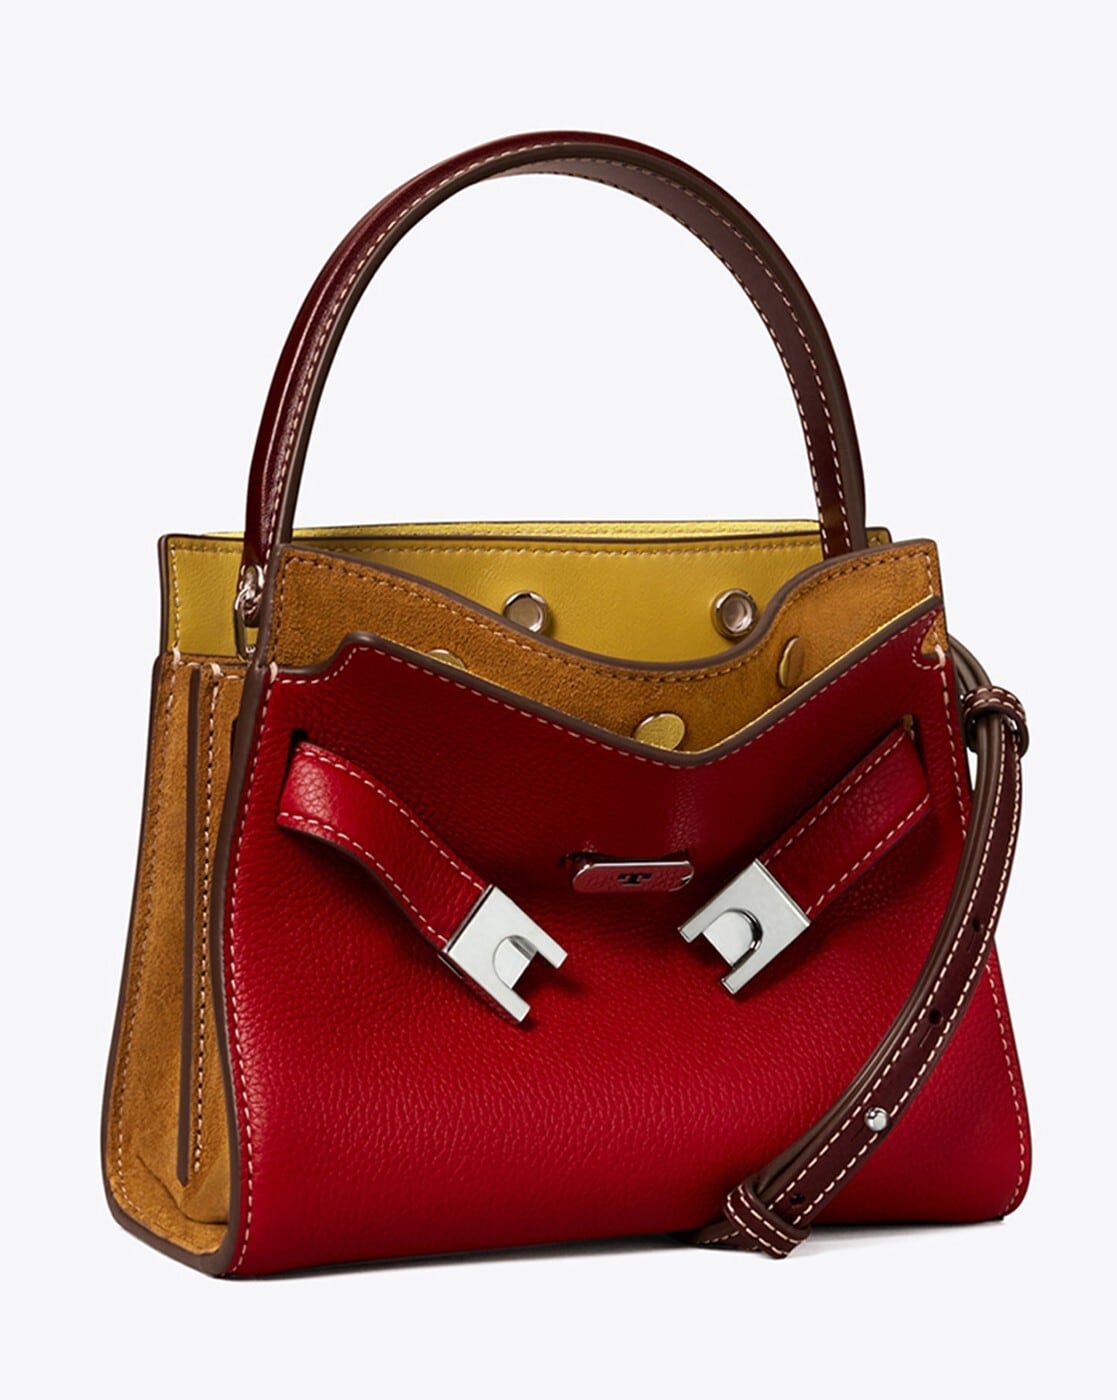 Petitte Lee Radziwill Pebbled Double Bag with Adjustable Strap